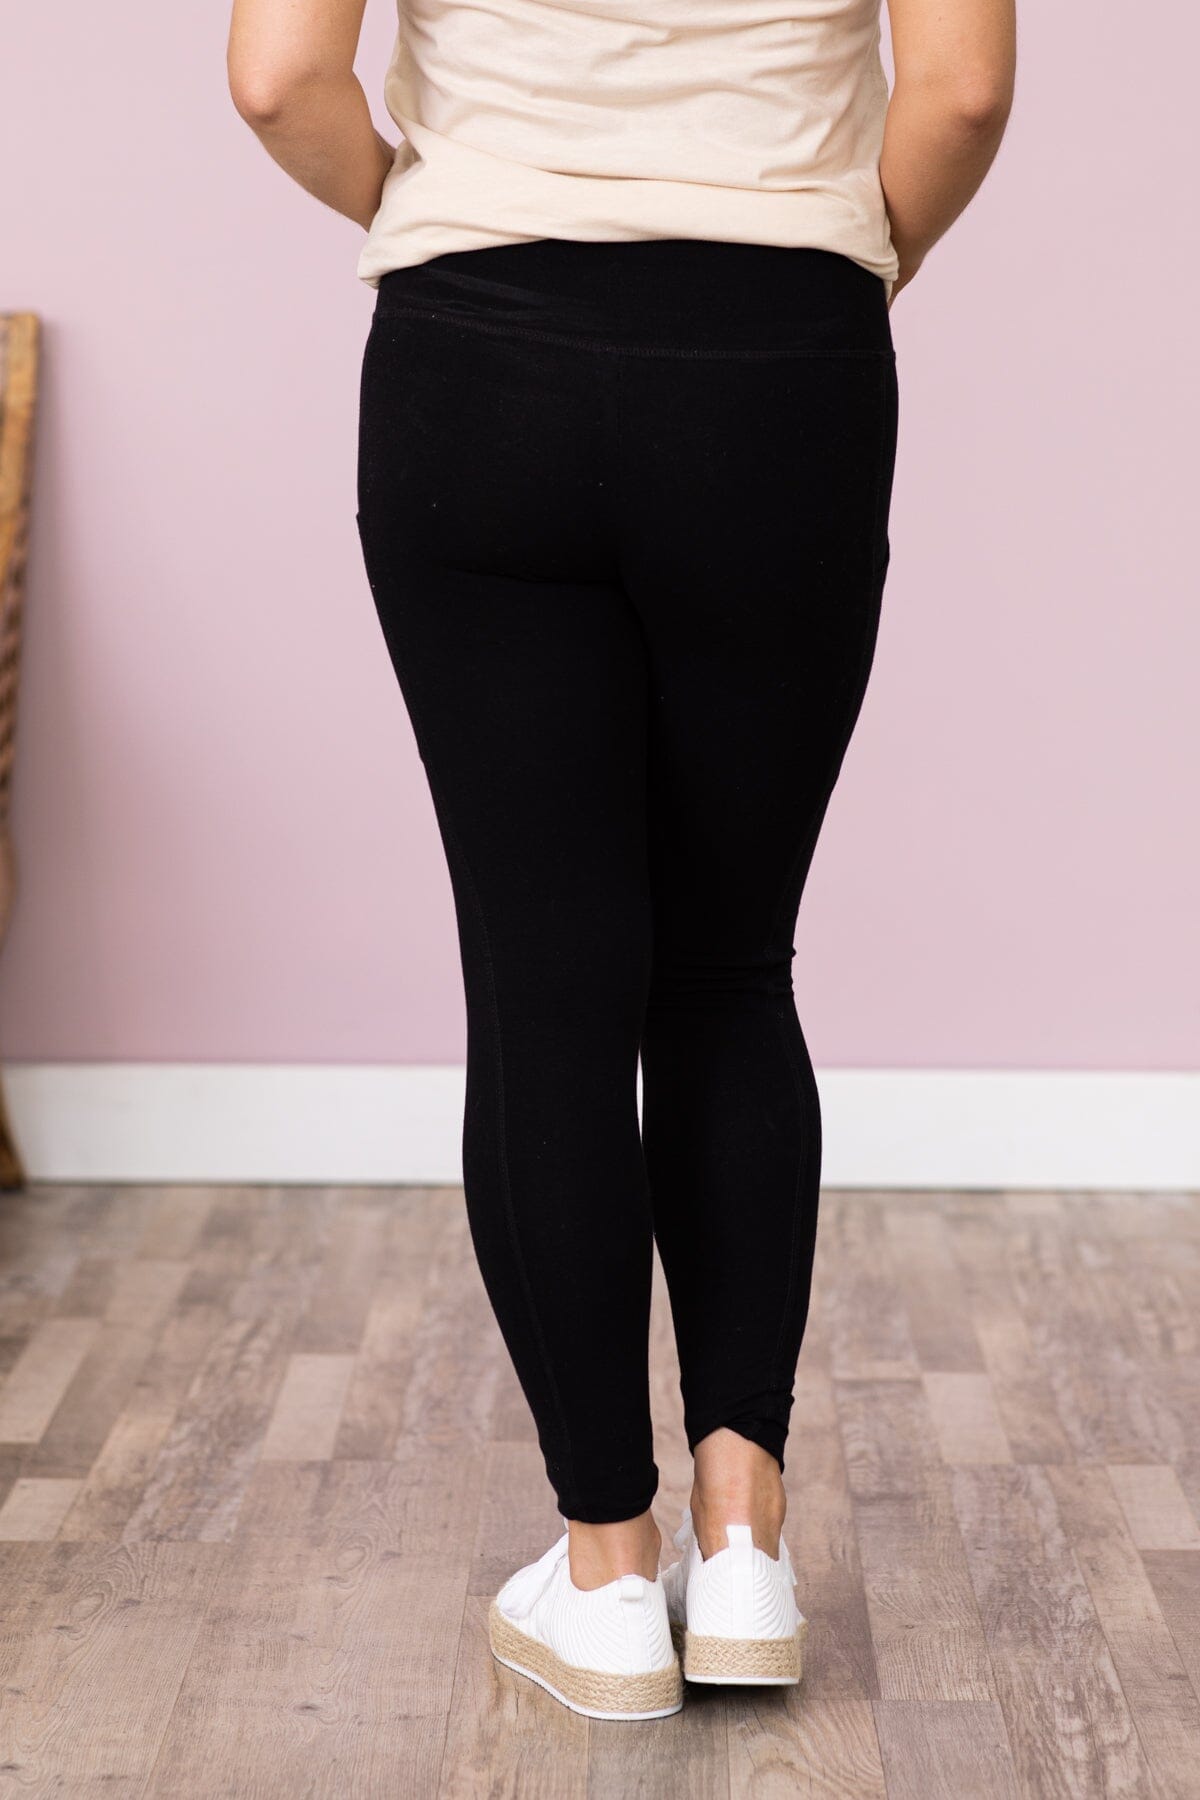 Black Leggings With Side Pocket - Filly Flair